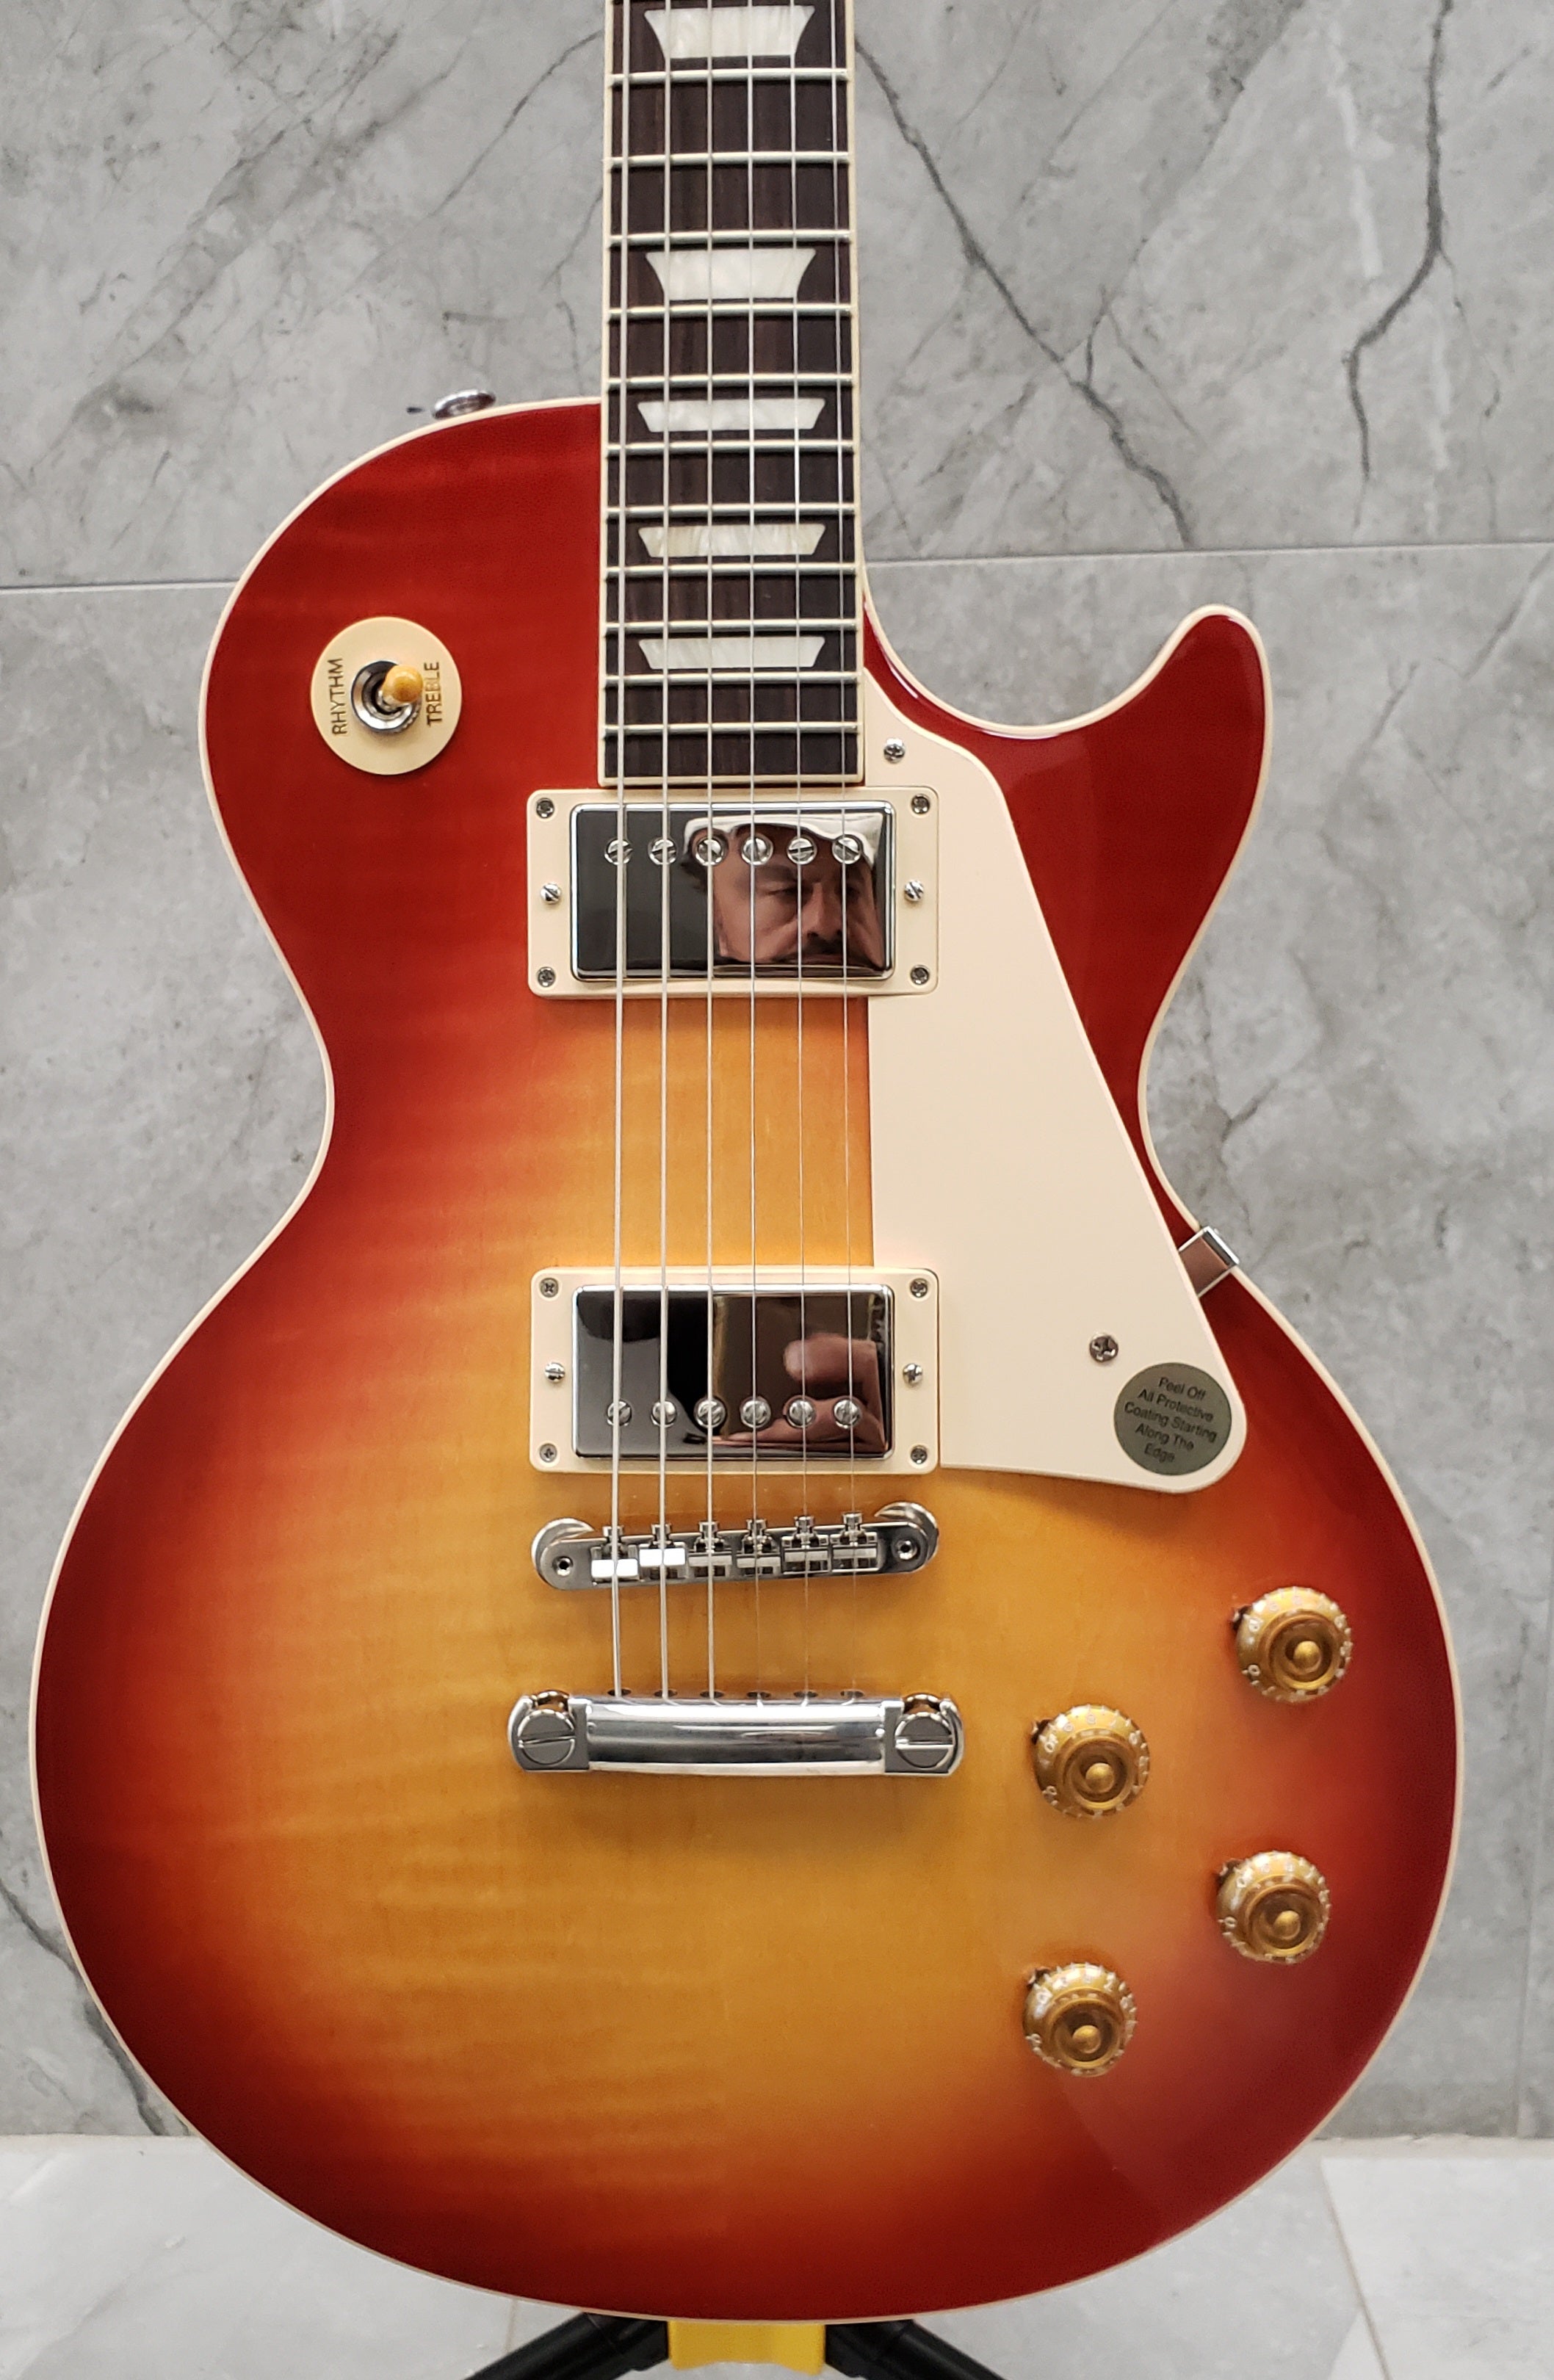 Gibson Les Paul Standard 50s LPS500HSNH Heritage Cherry Sunburst SERIAL  NUMBER 210920044 - 9.2 LBS